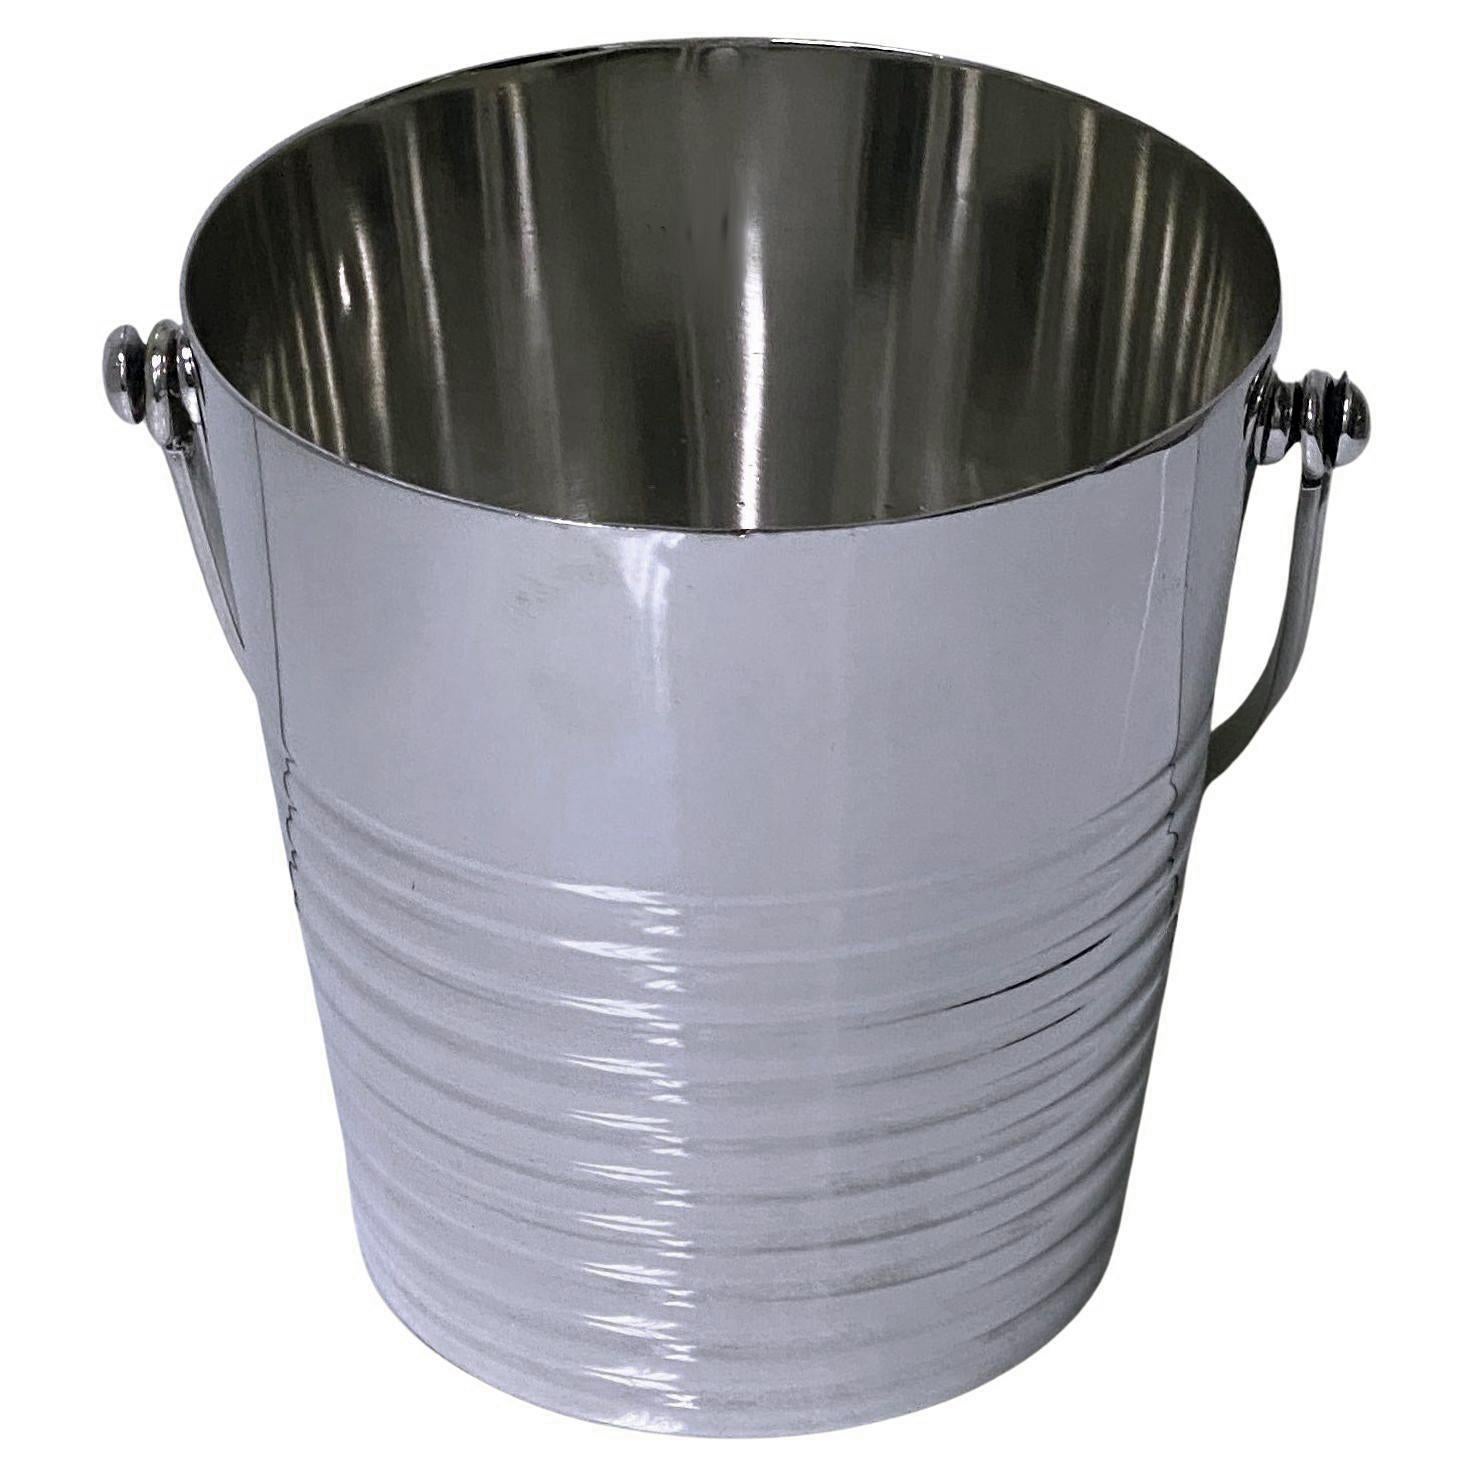 Christofle Art Deco Luc Lanel Ondulations Silver Plate small Wine Bucket, C.1935 Very slightly tapered form, plain with ribbed band surround, swing reeded handle, conforming in design. Marked with Christofle Marks on baseand number 18. Height: 5.25